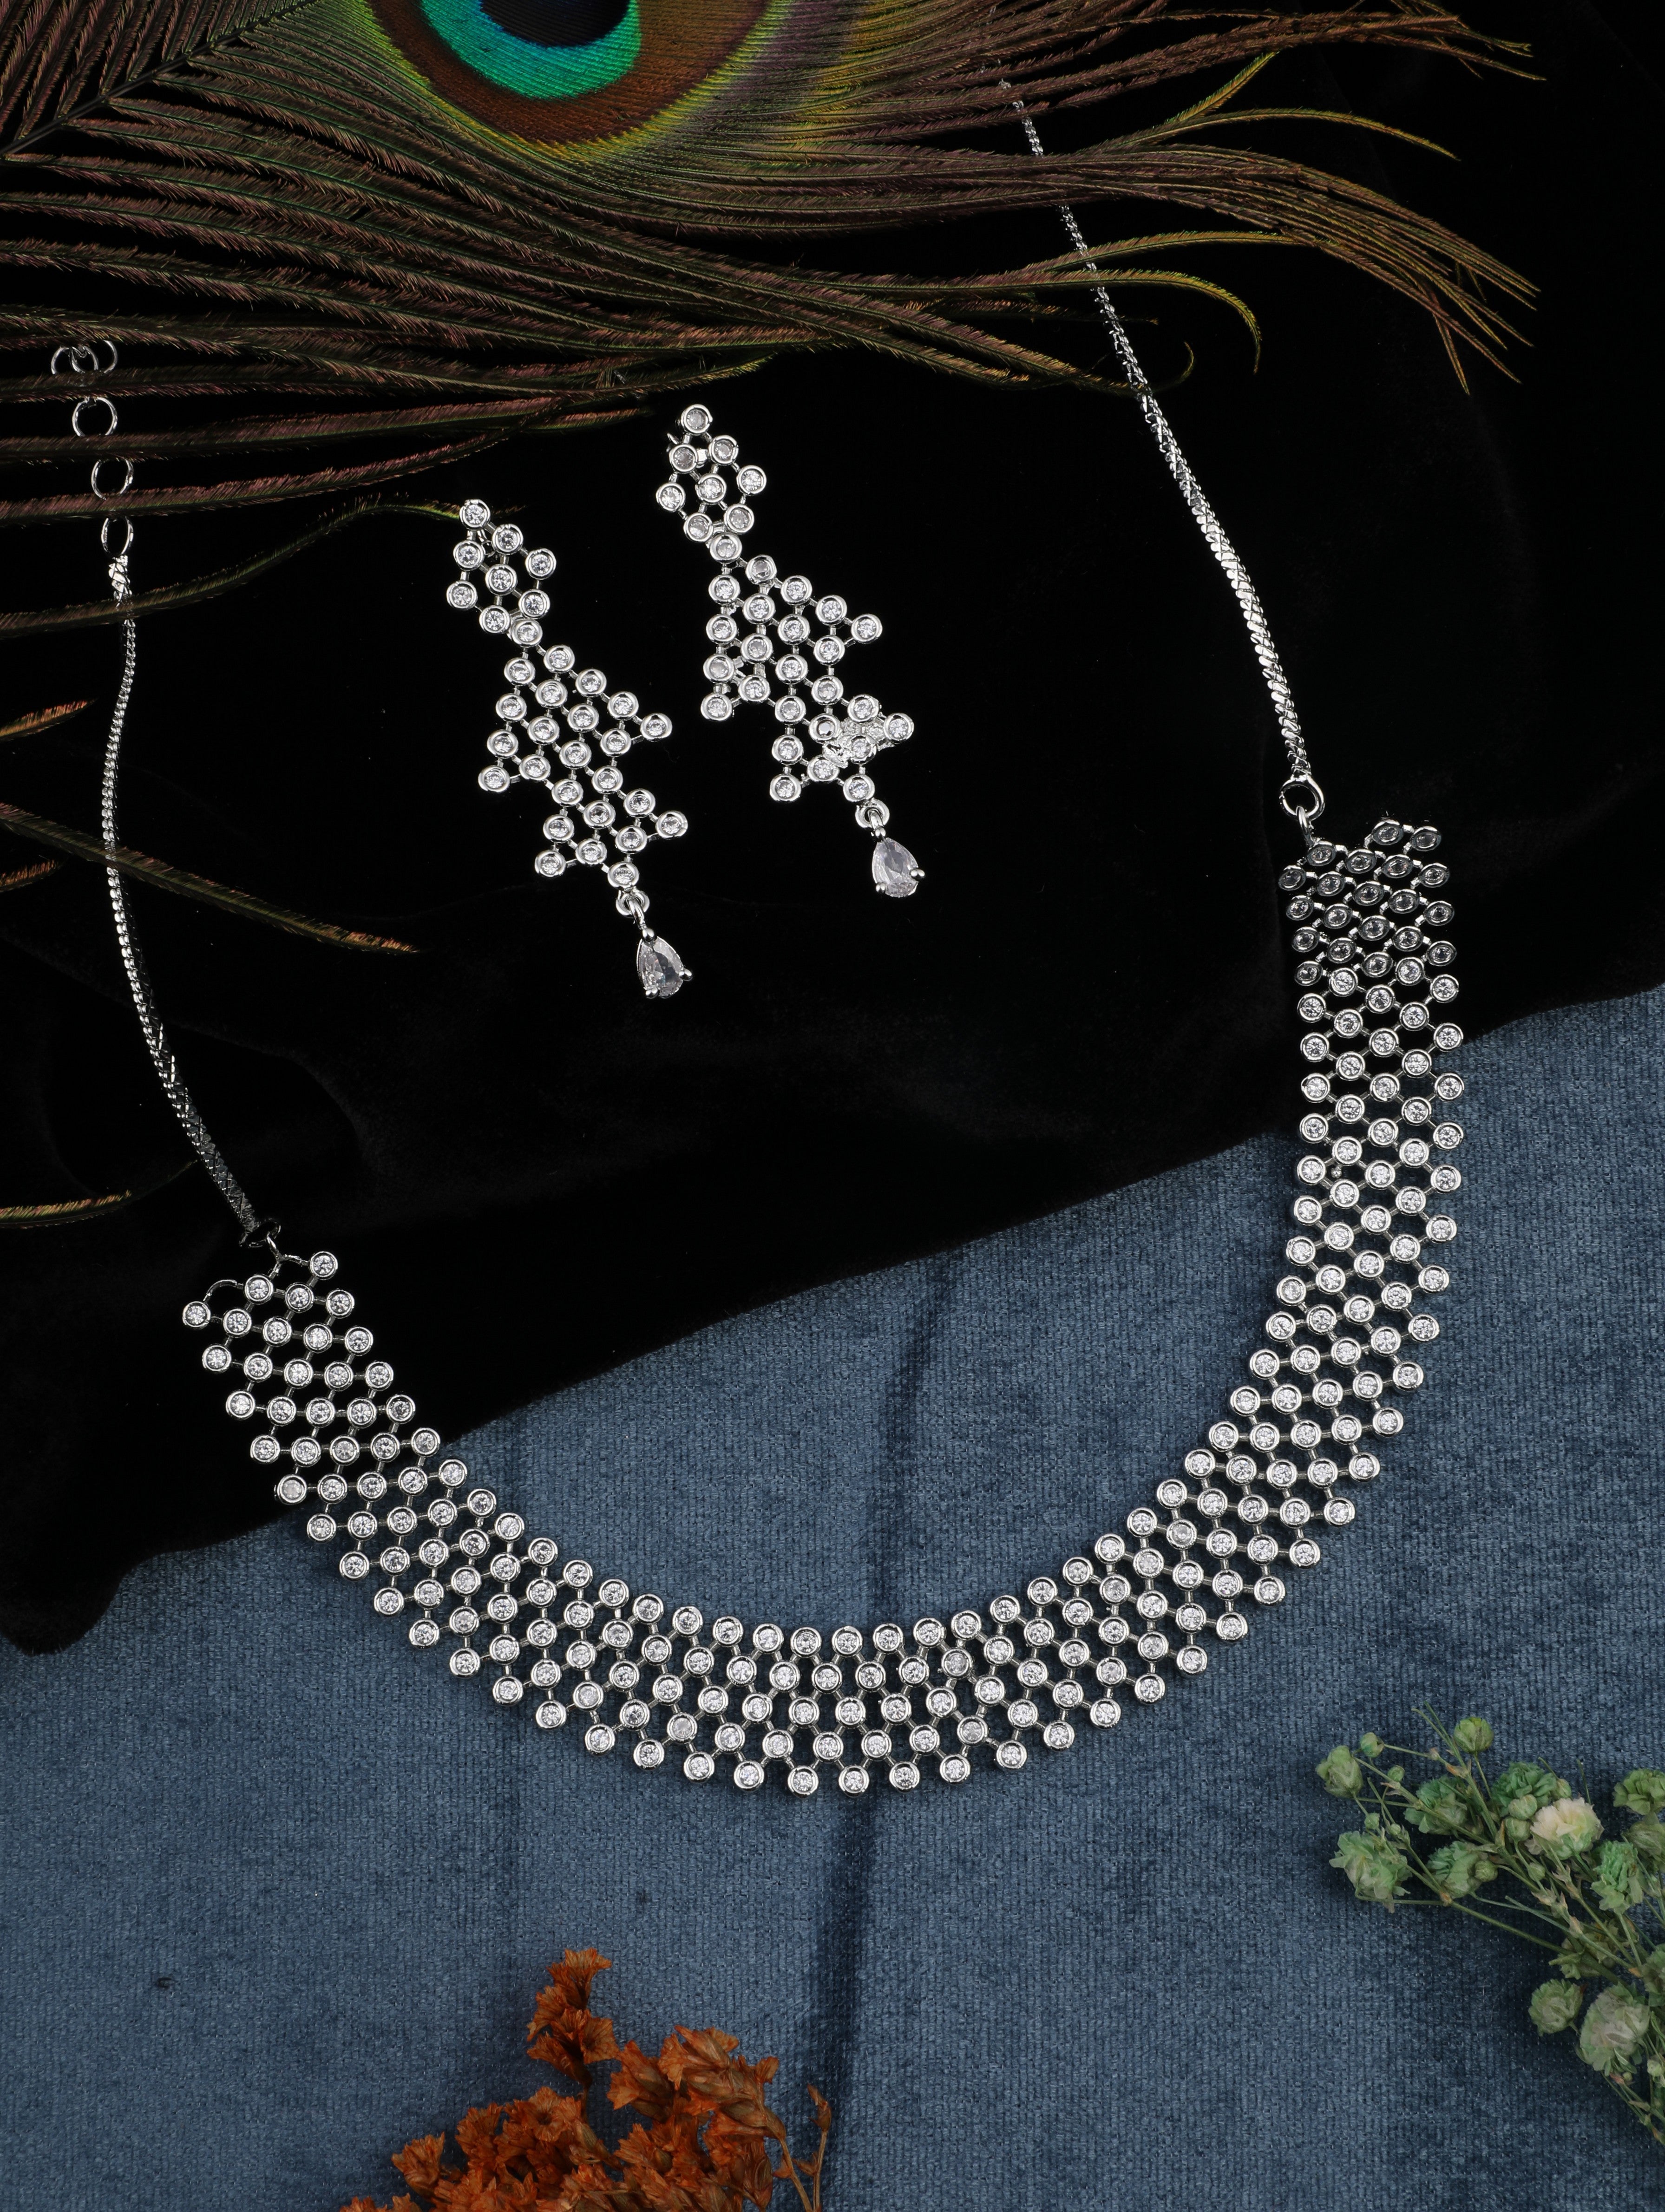 Rhodium Plated Cubic Zircons Studded Necklace Set.